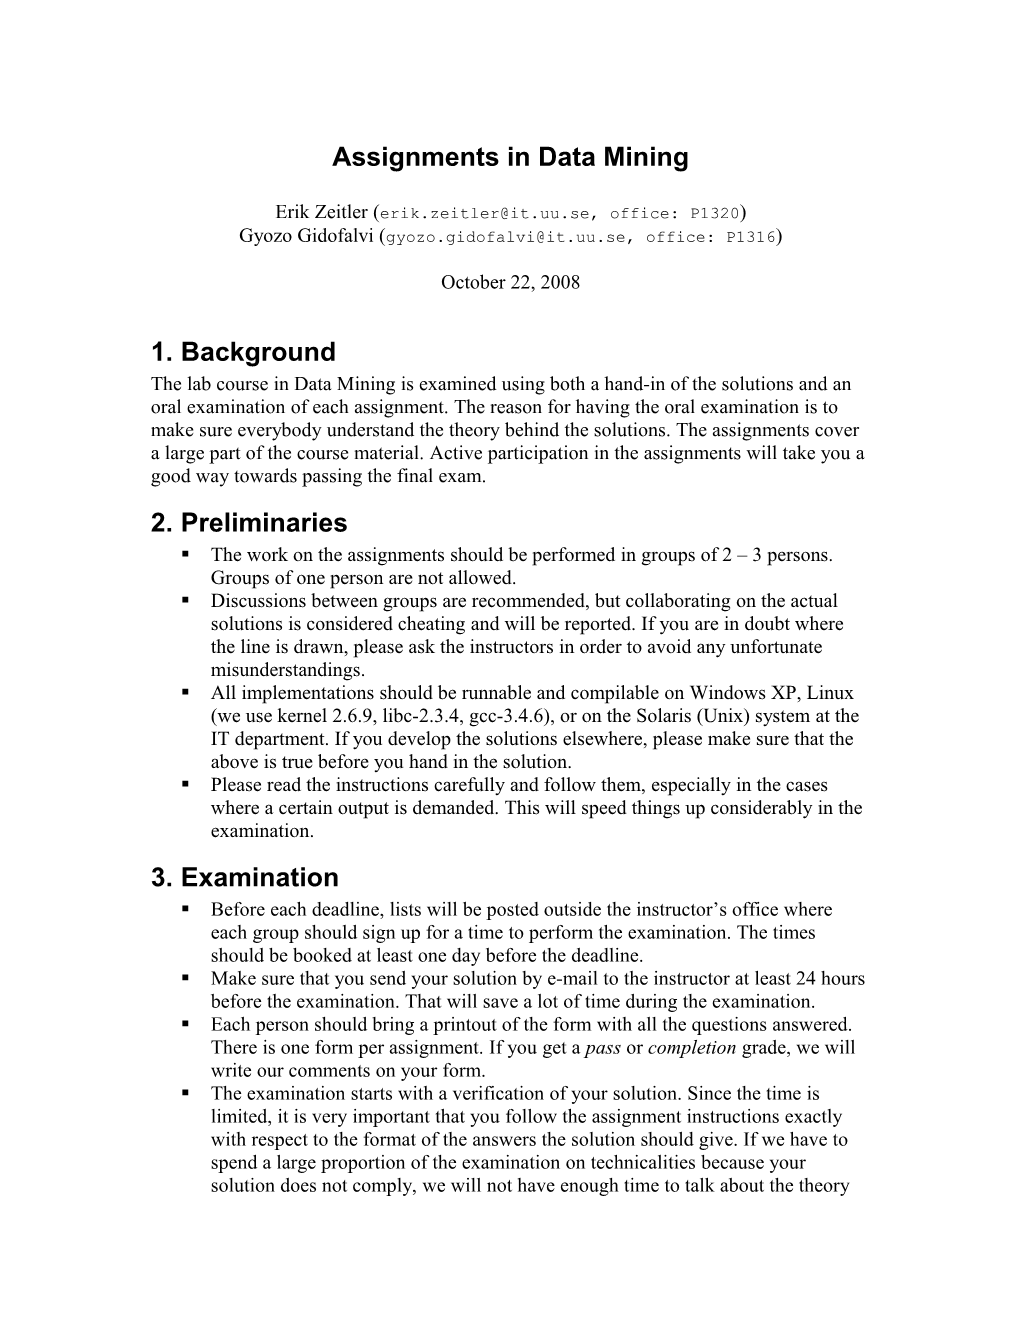 Assignments in Data Mining